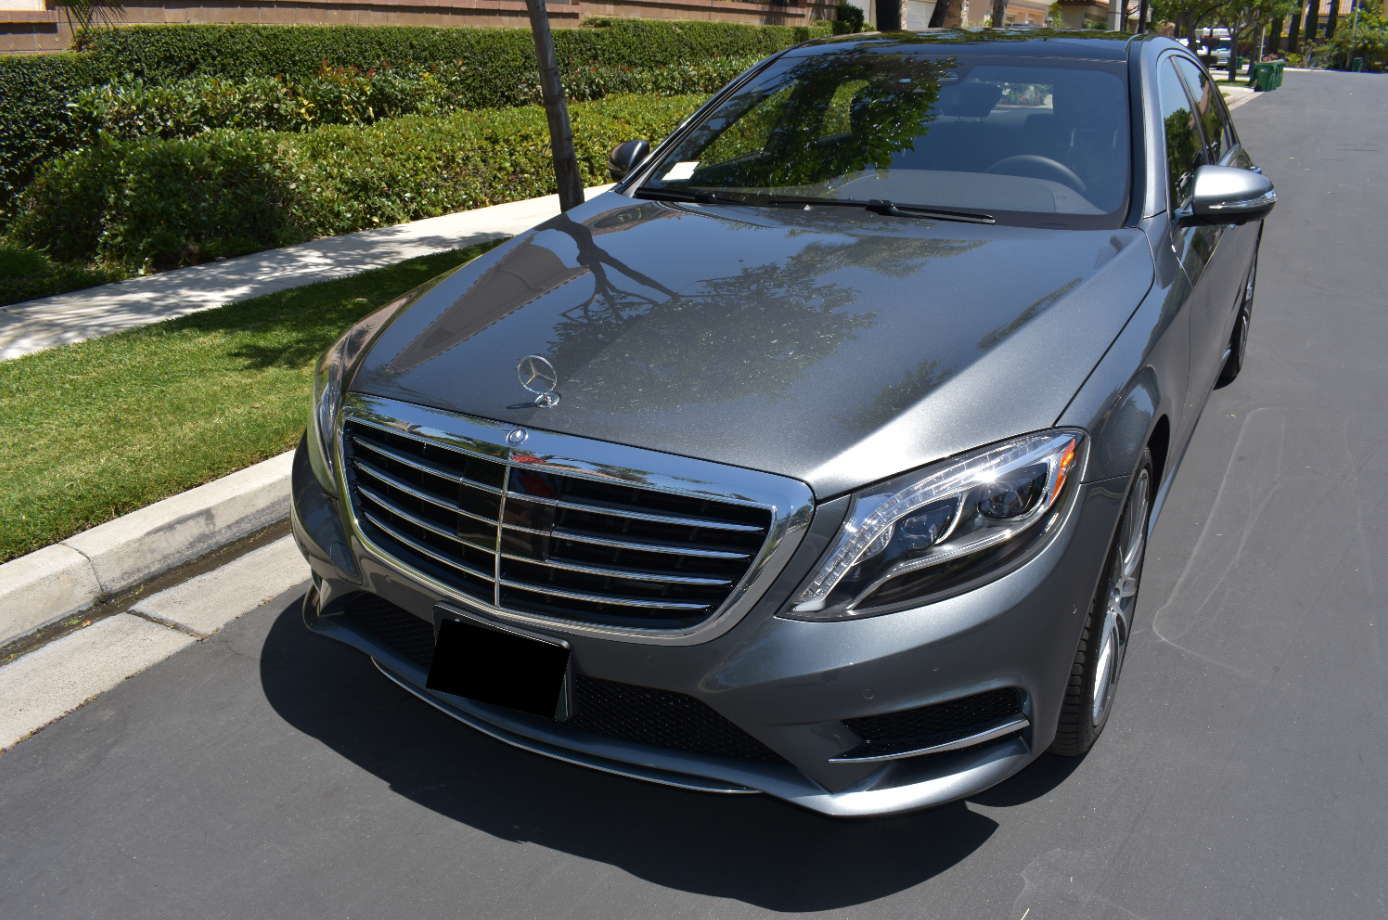 2017 Mercedes-Benz S550 - LIKE NEW 2017 MERCEDES-BENZ S550  (MOTIVATED SELLER) - Used - VIN WDDUG8CB0HA317443 - 685 Miles - 8 cyl - 4WD - Automatic - Sedan - Gray - Irvine, CA 92620, United States